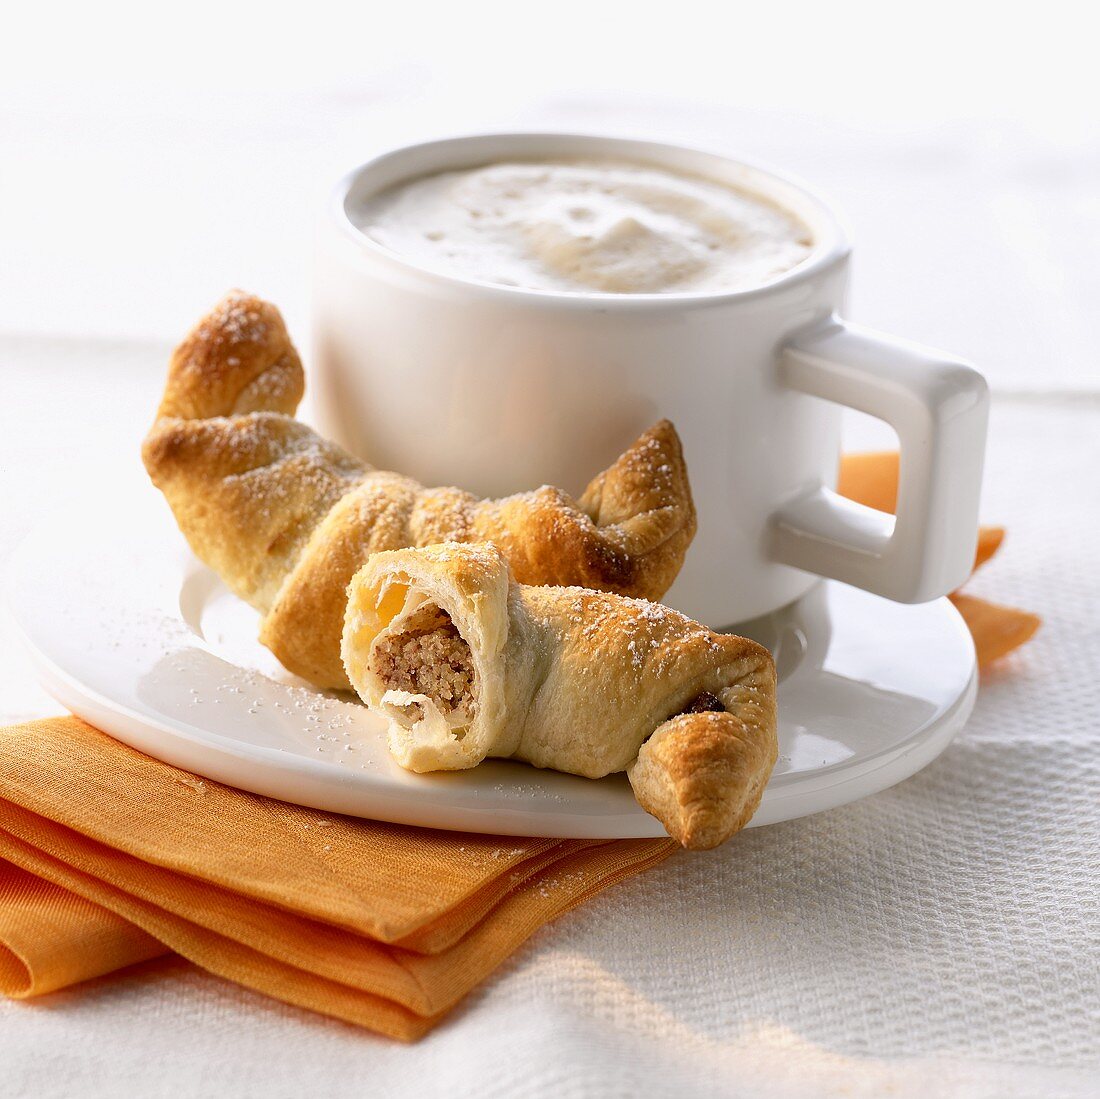 Nut crescents and a cup of cappuccino